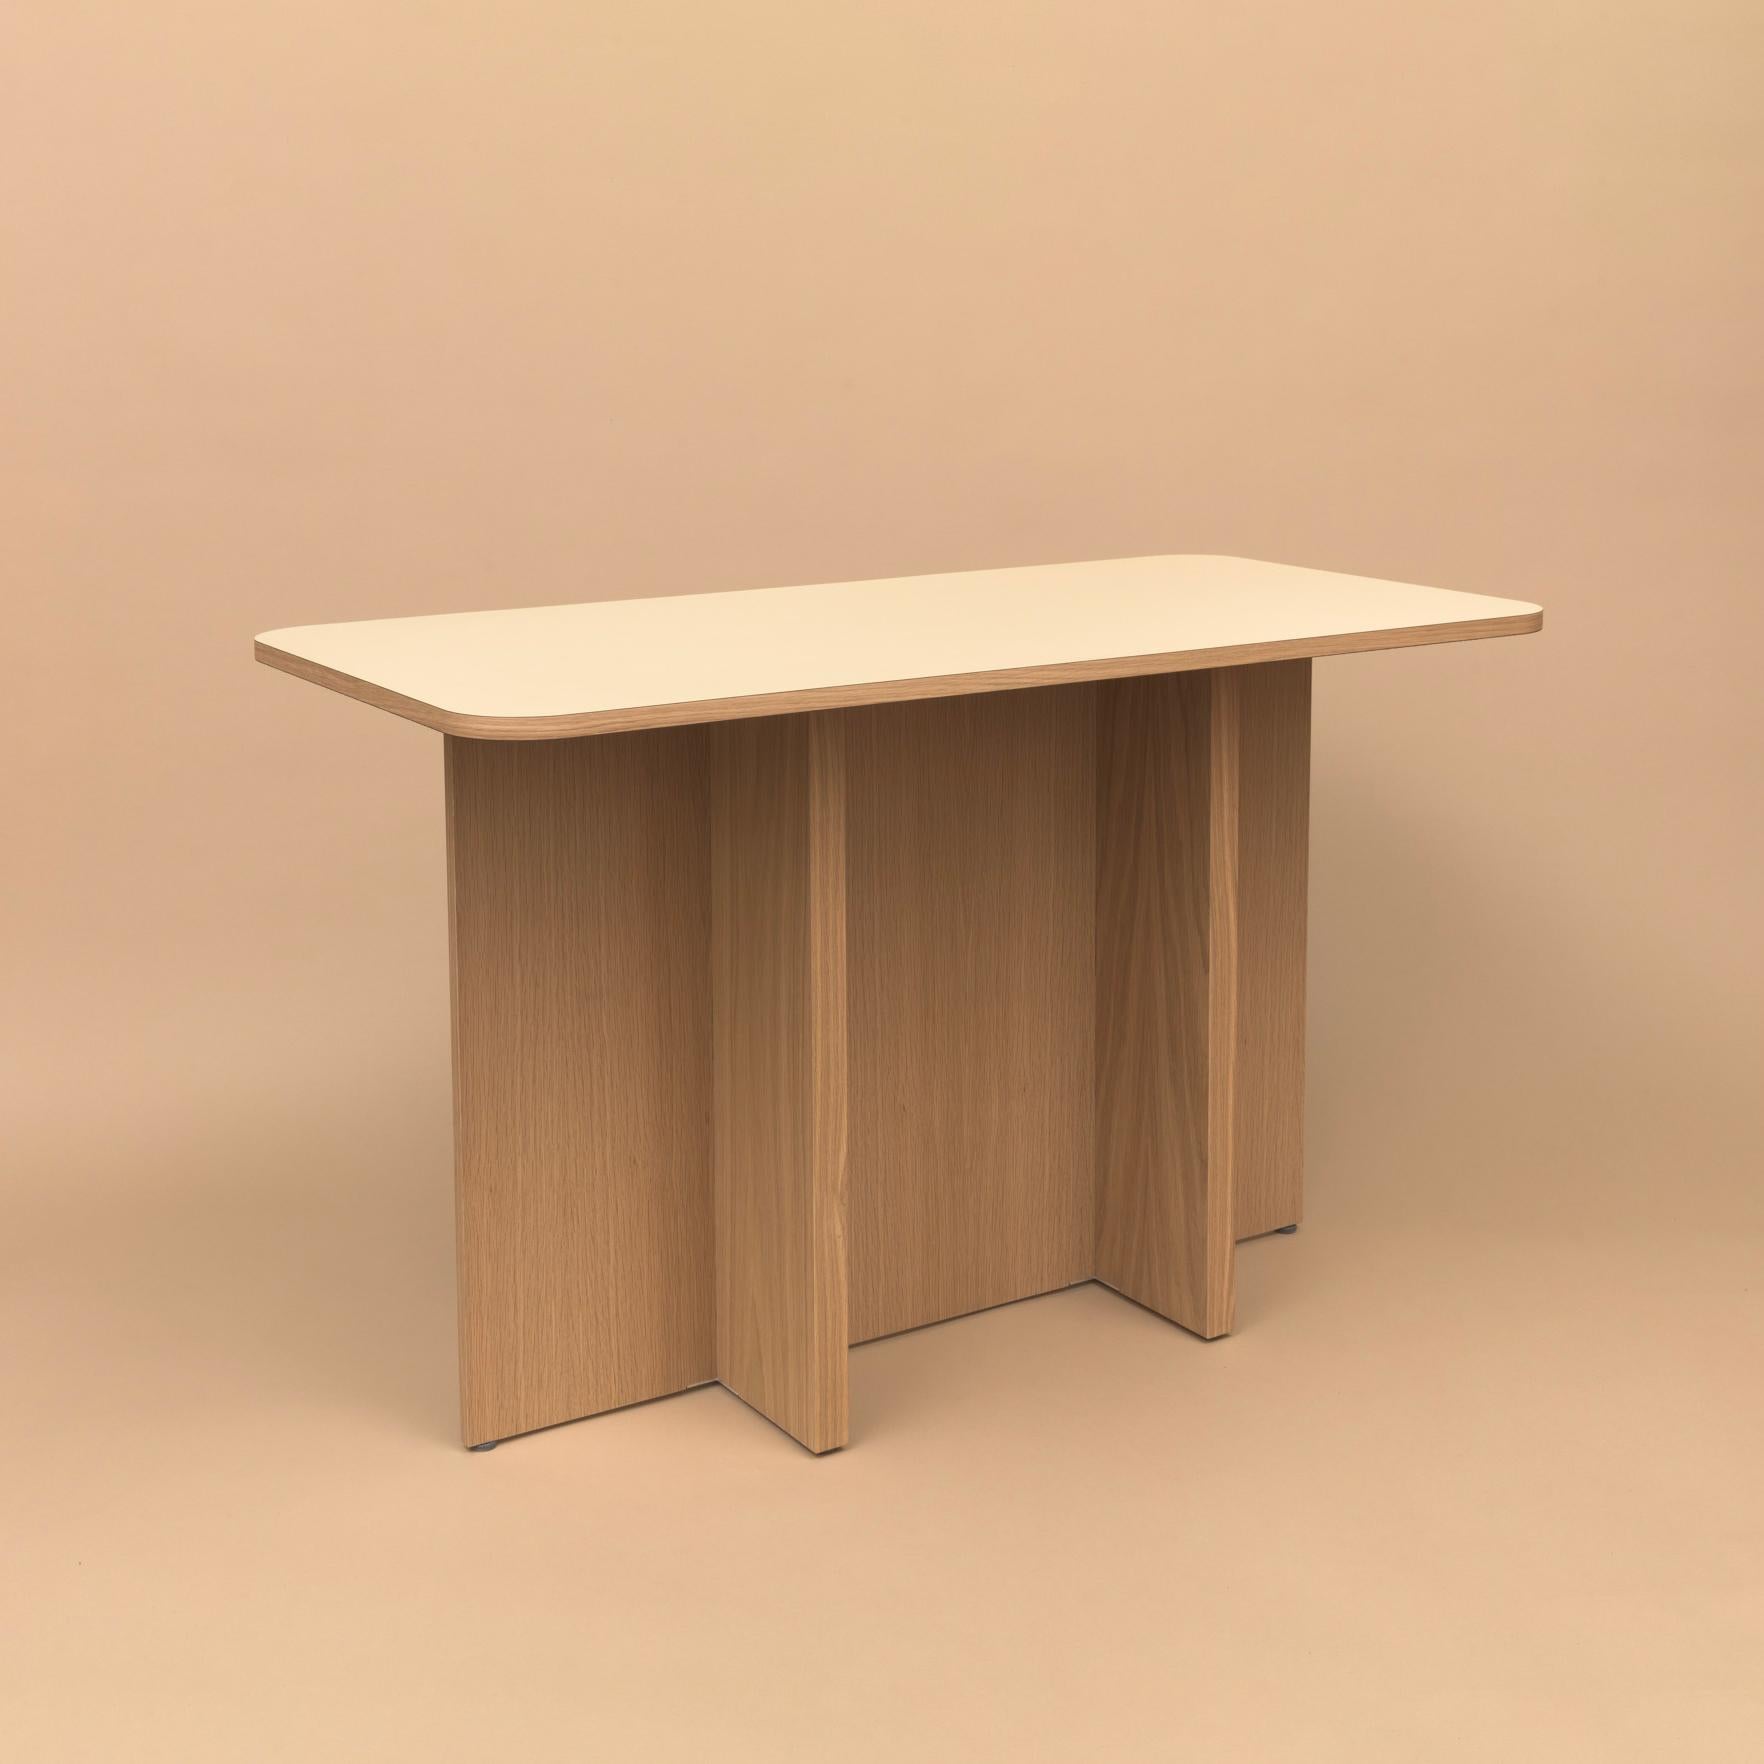 Hand-Crafted T-Top Dining Table in White Oak Veneered Plywood and Colorful Laminate